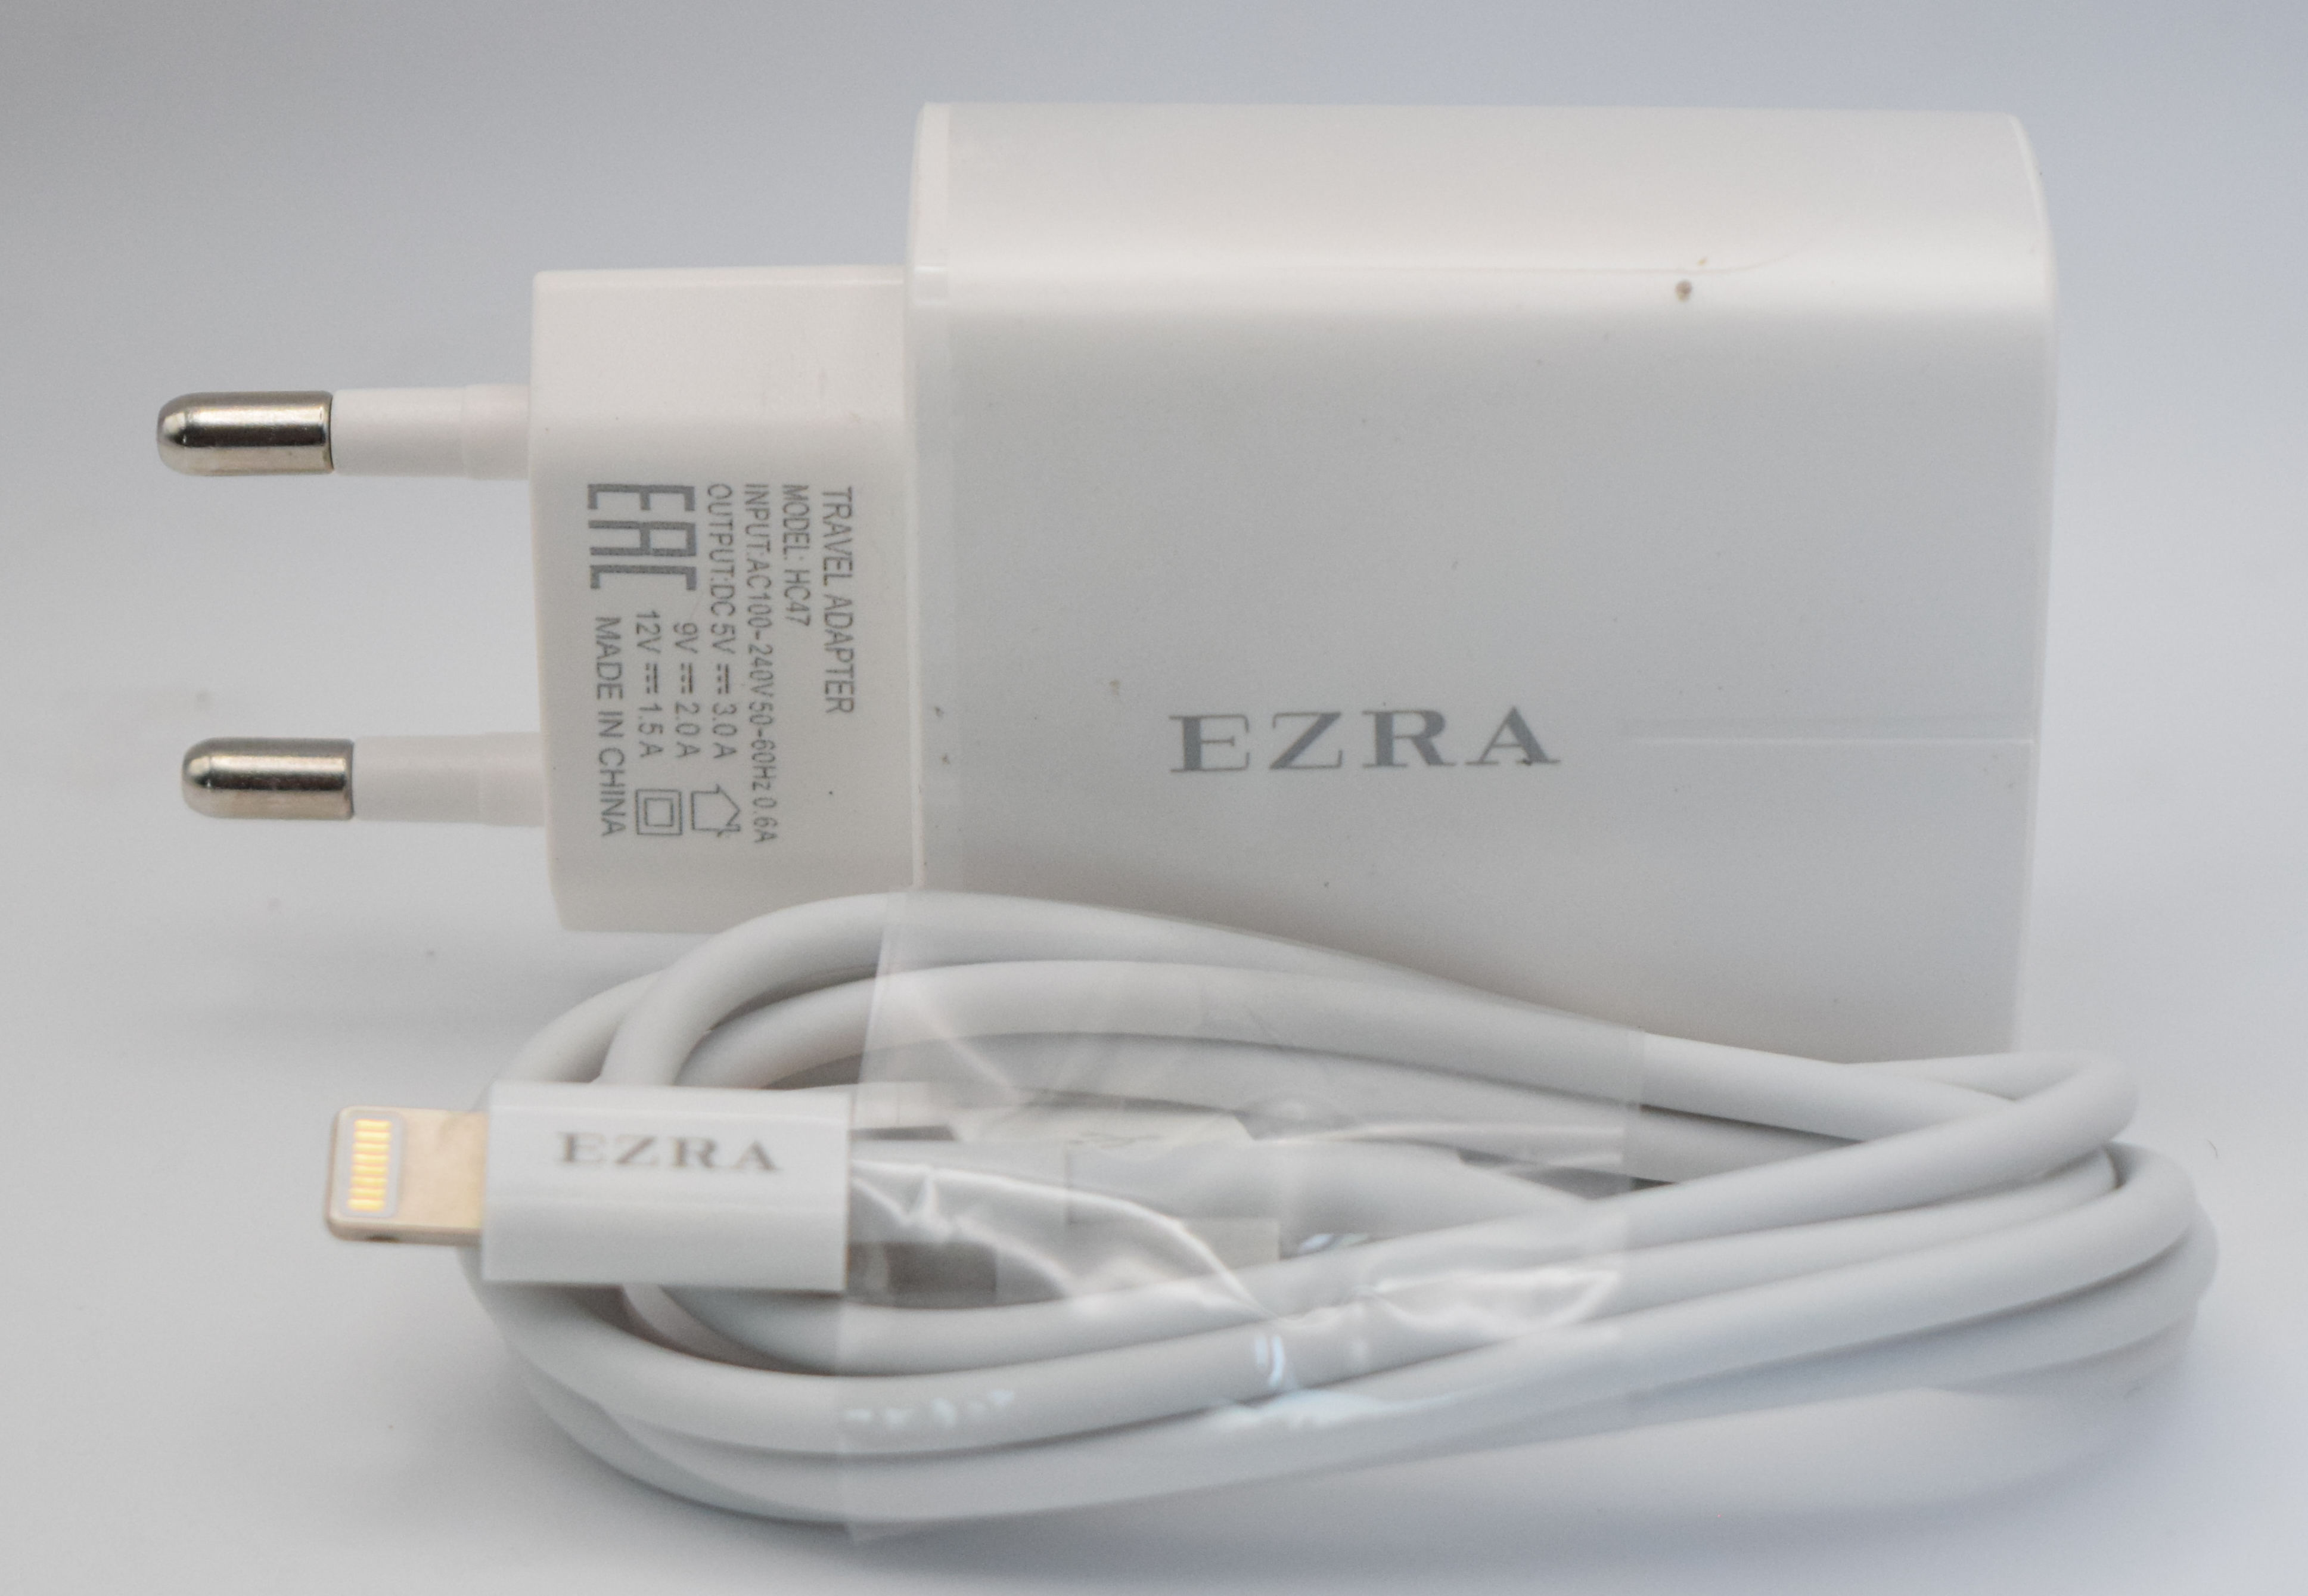 USB charger ; EZRA ; FAST CHARGER, TRAVEL ADAPTER